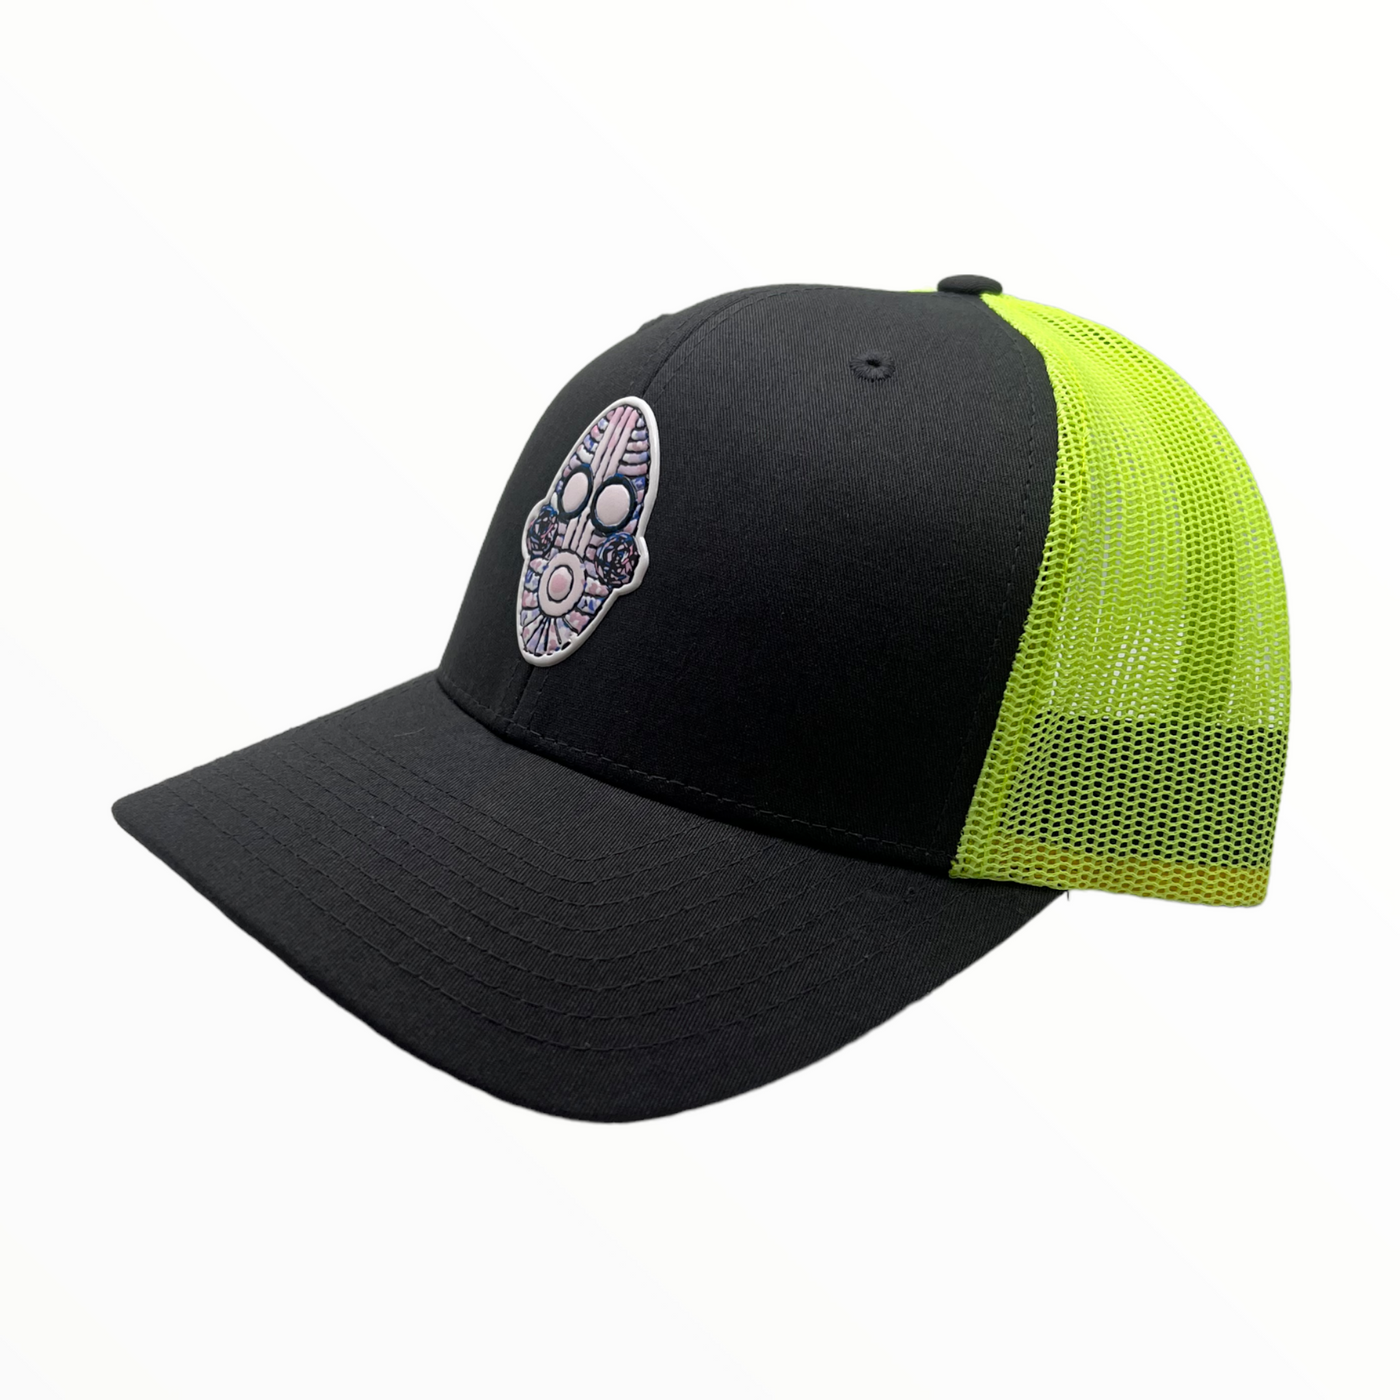 TRUCKER HAT - CHARCOAL & NEON YELLOW - POLY PRESS MACCADO PATCH